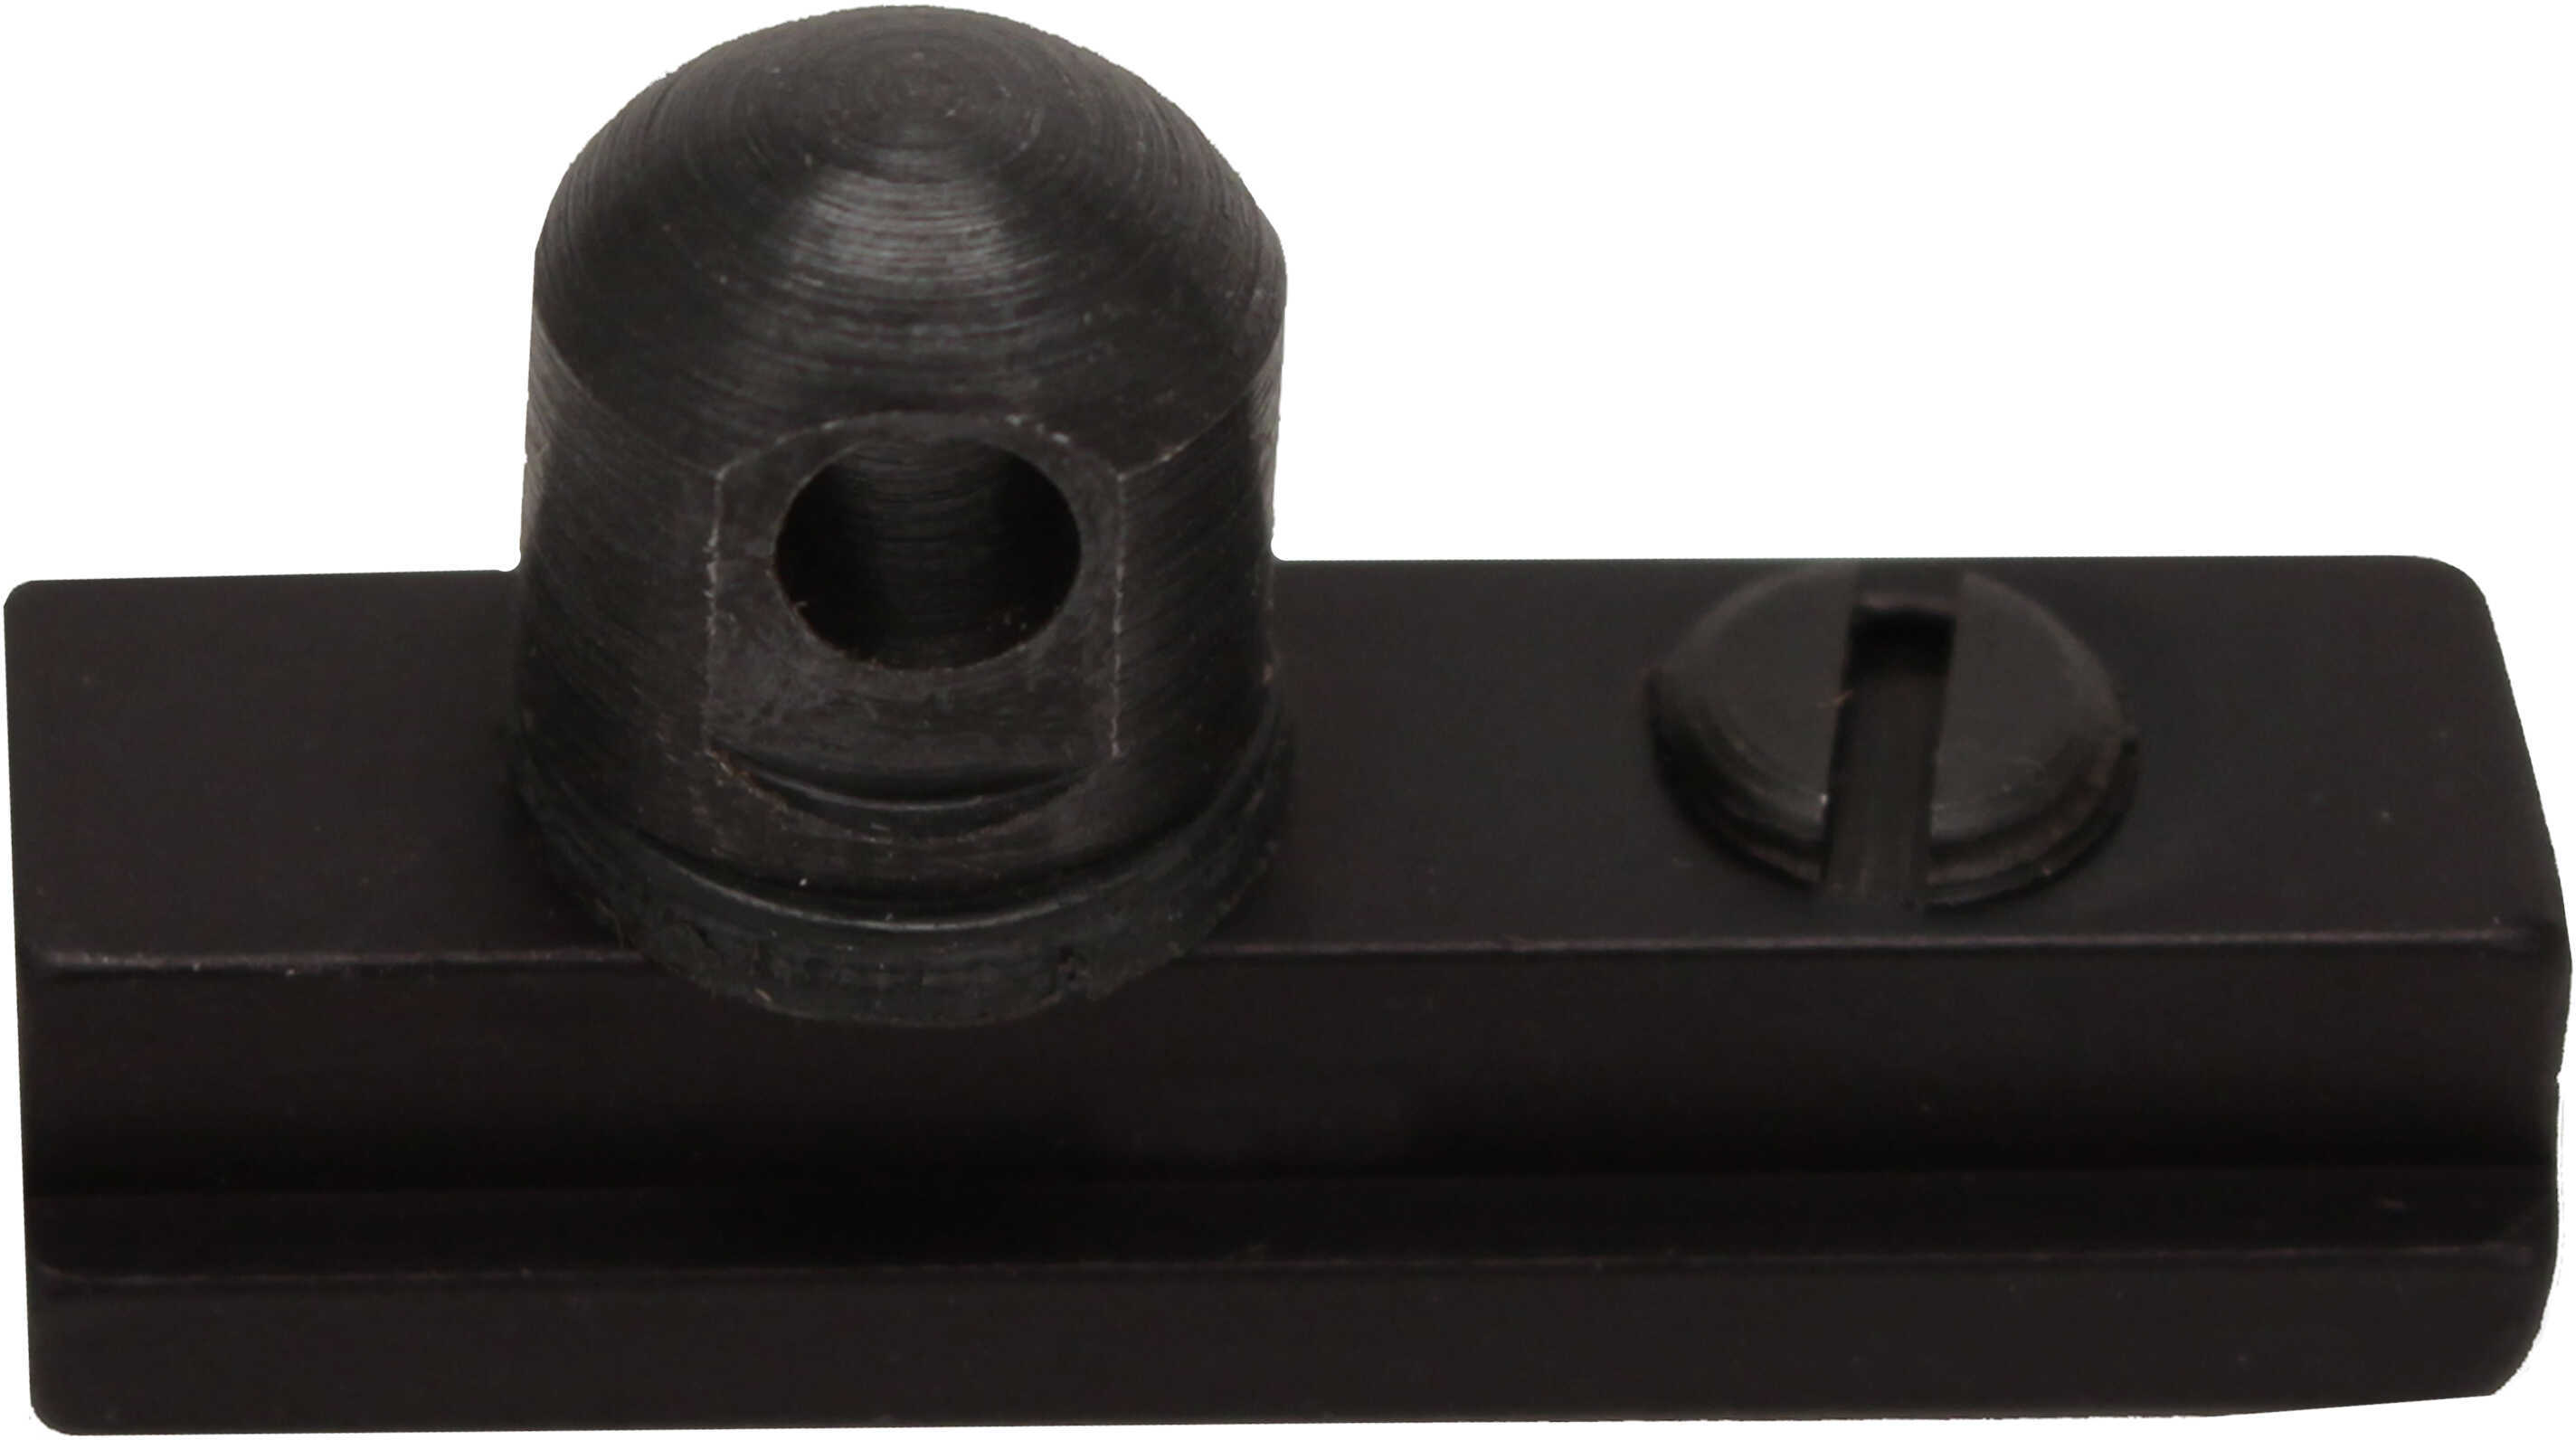 Harris #6A Bipod Adapter For Rails 5/16 Wide